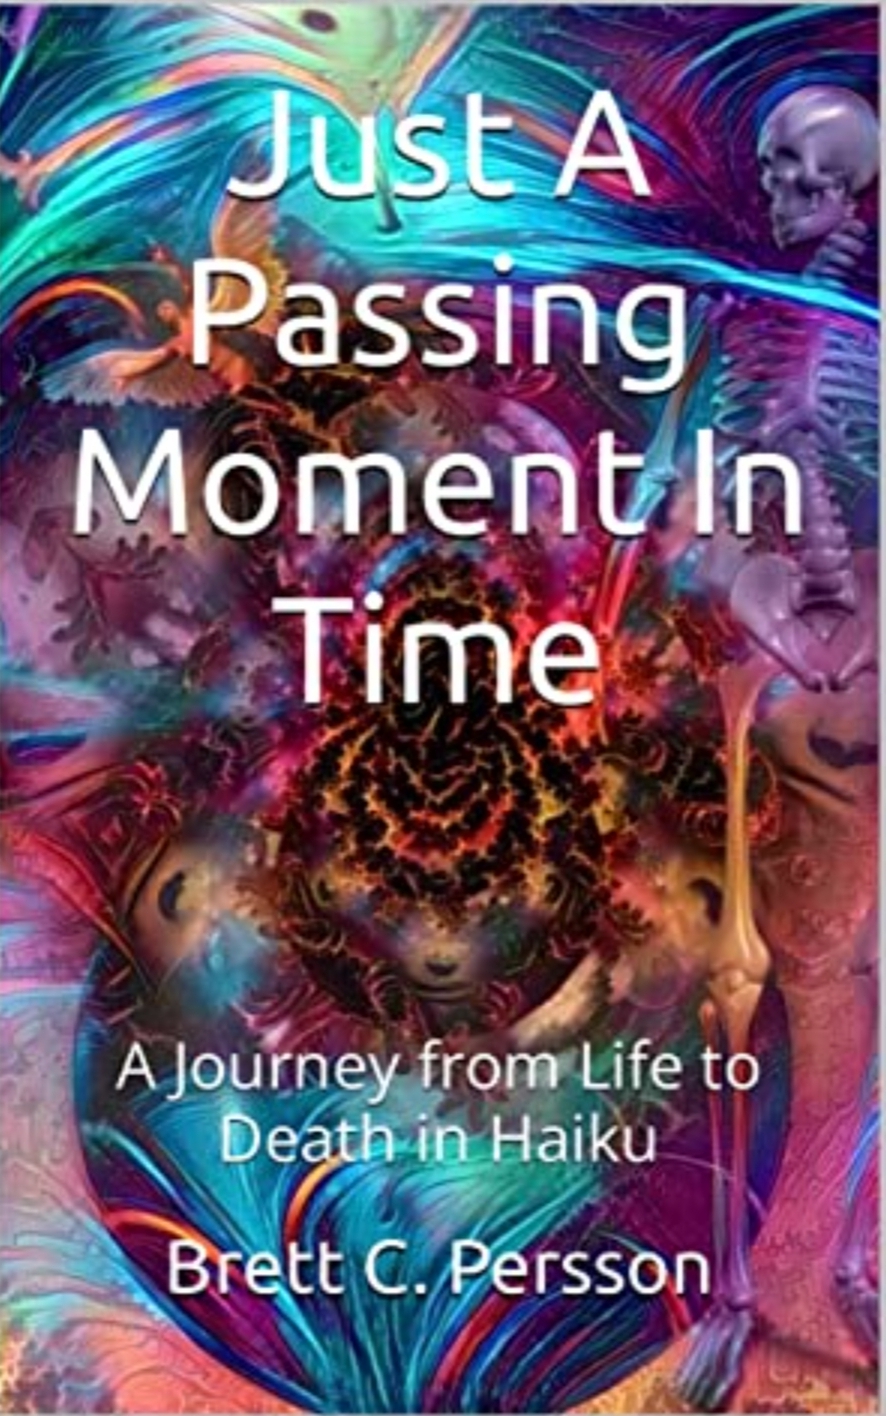 Just A Passing Moment in Time